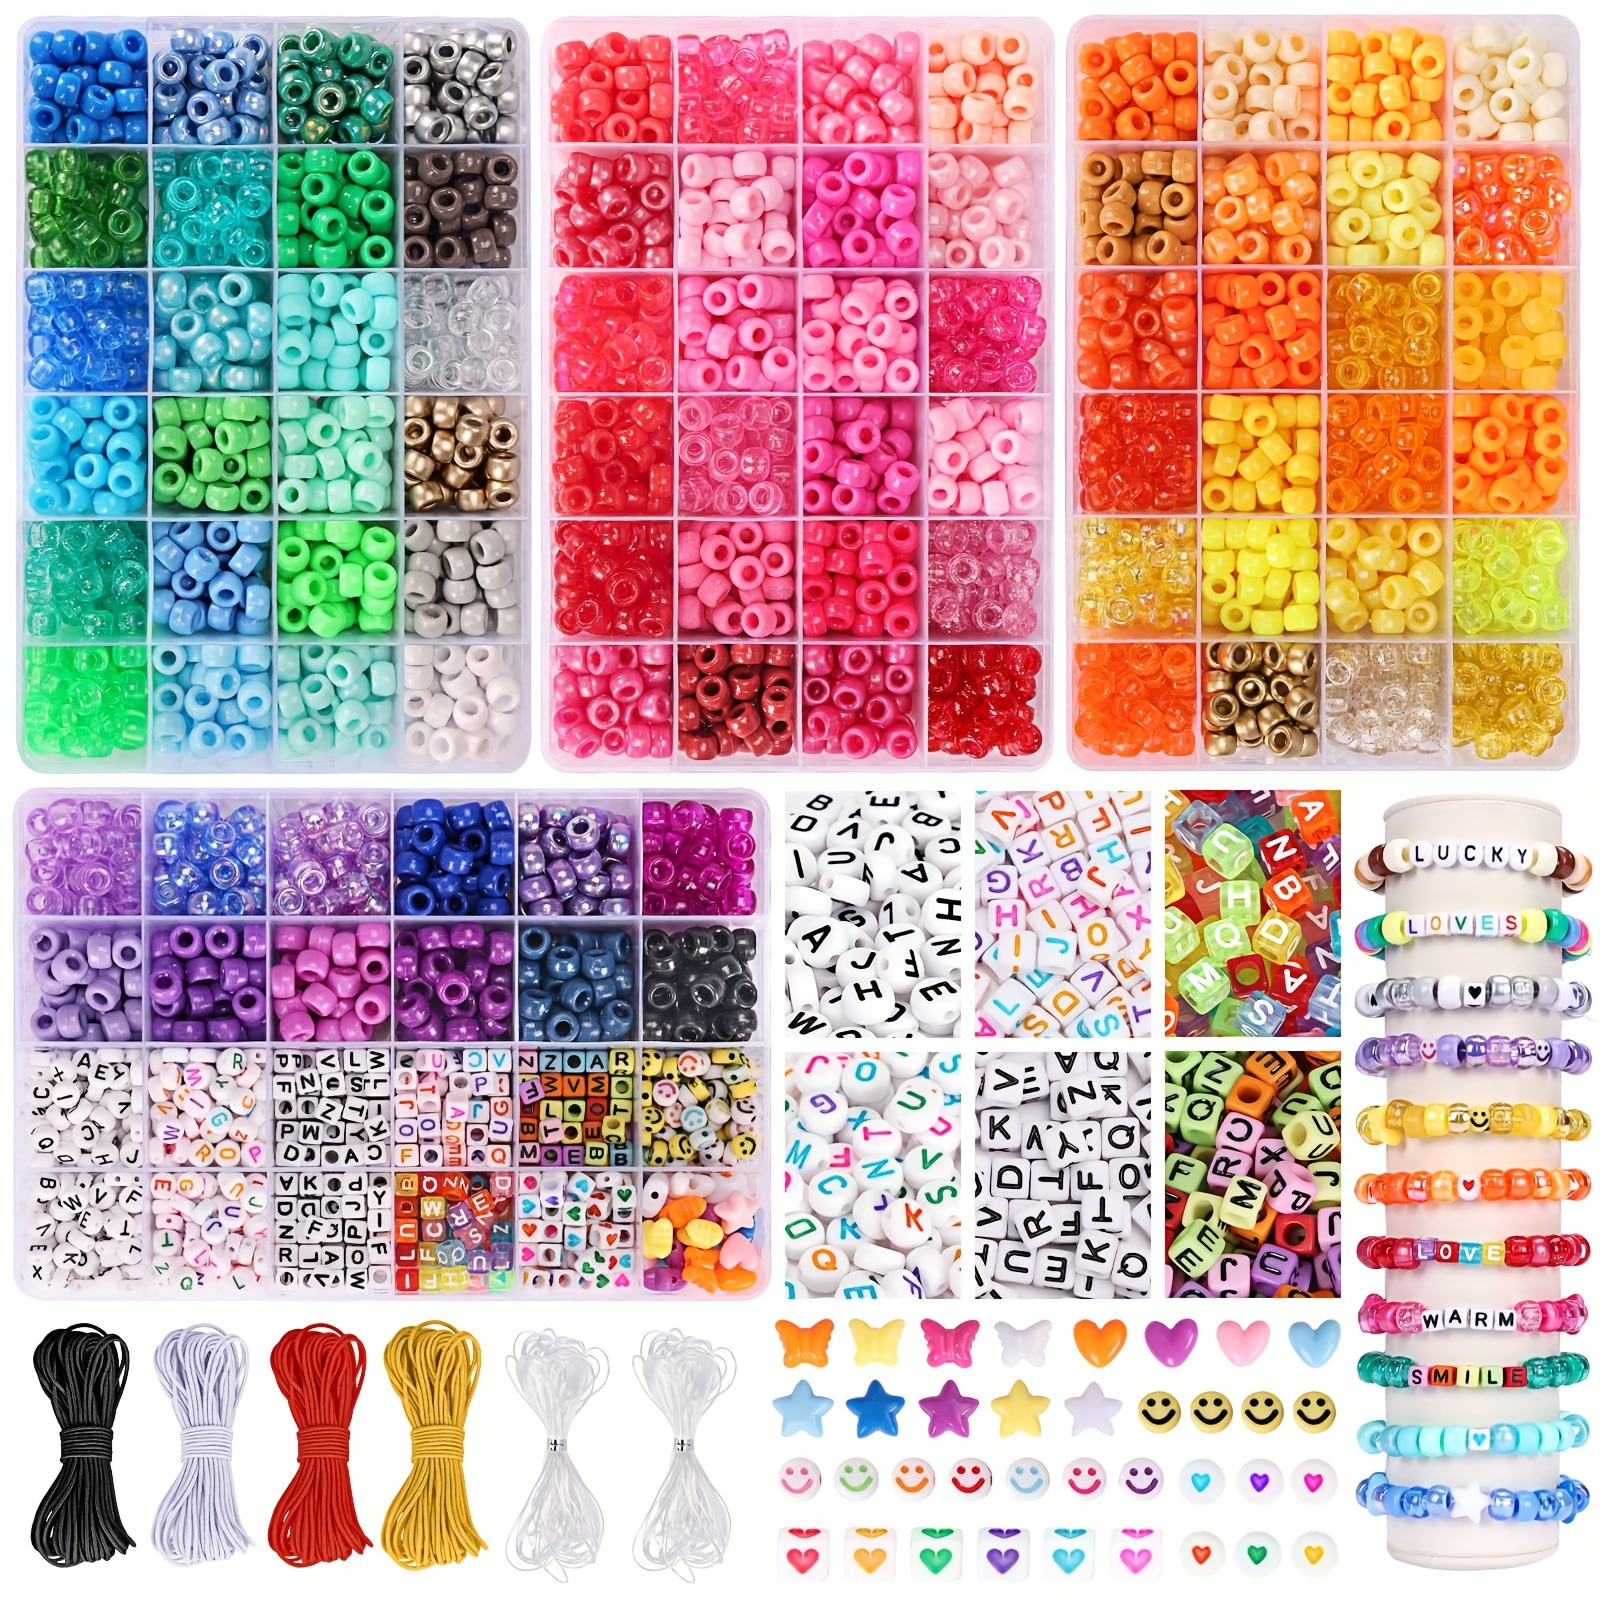 

Bead Bracelet Making Kit, 4900pcs Beads Kit, Friendship Bracelet Making Kit With 84 Colors , Rainbow Hair Beads, Letter Heart For Craft Gifts Bracelets Jewelry Making With Elastic Strings